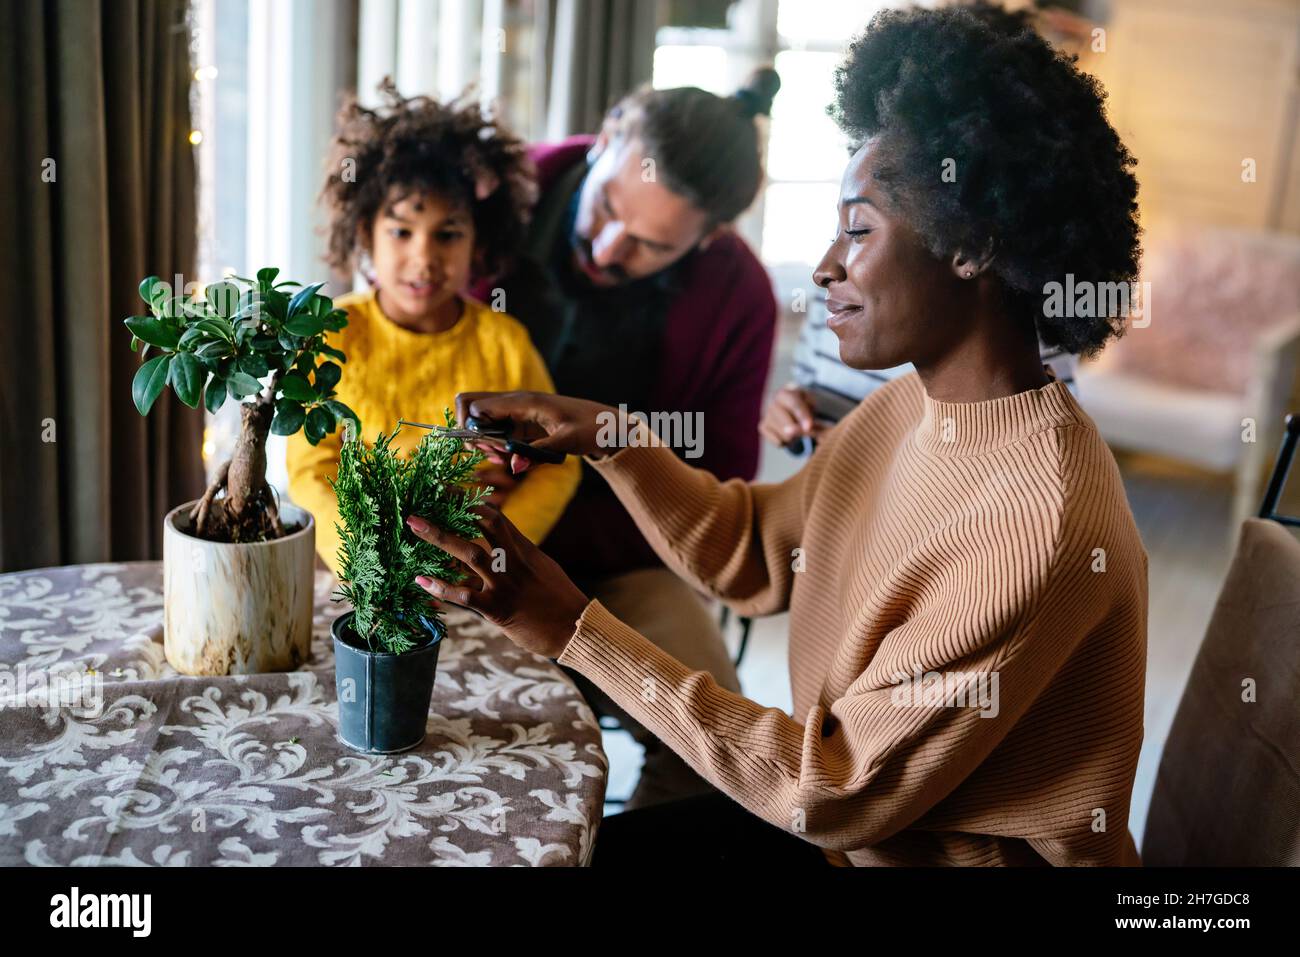 Home hobbies gardening with children and learning botany. Family love happiness concept Stock Photo